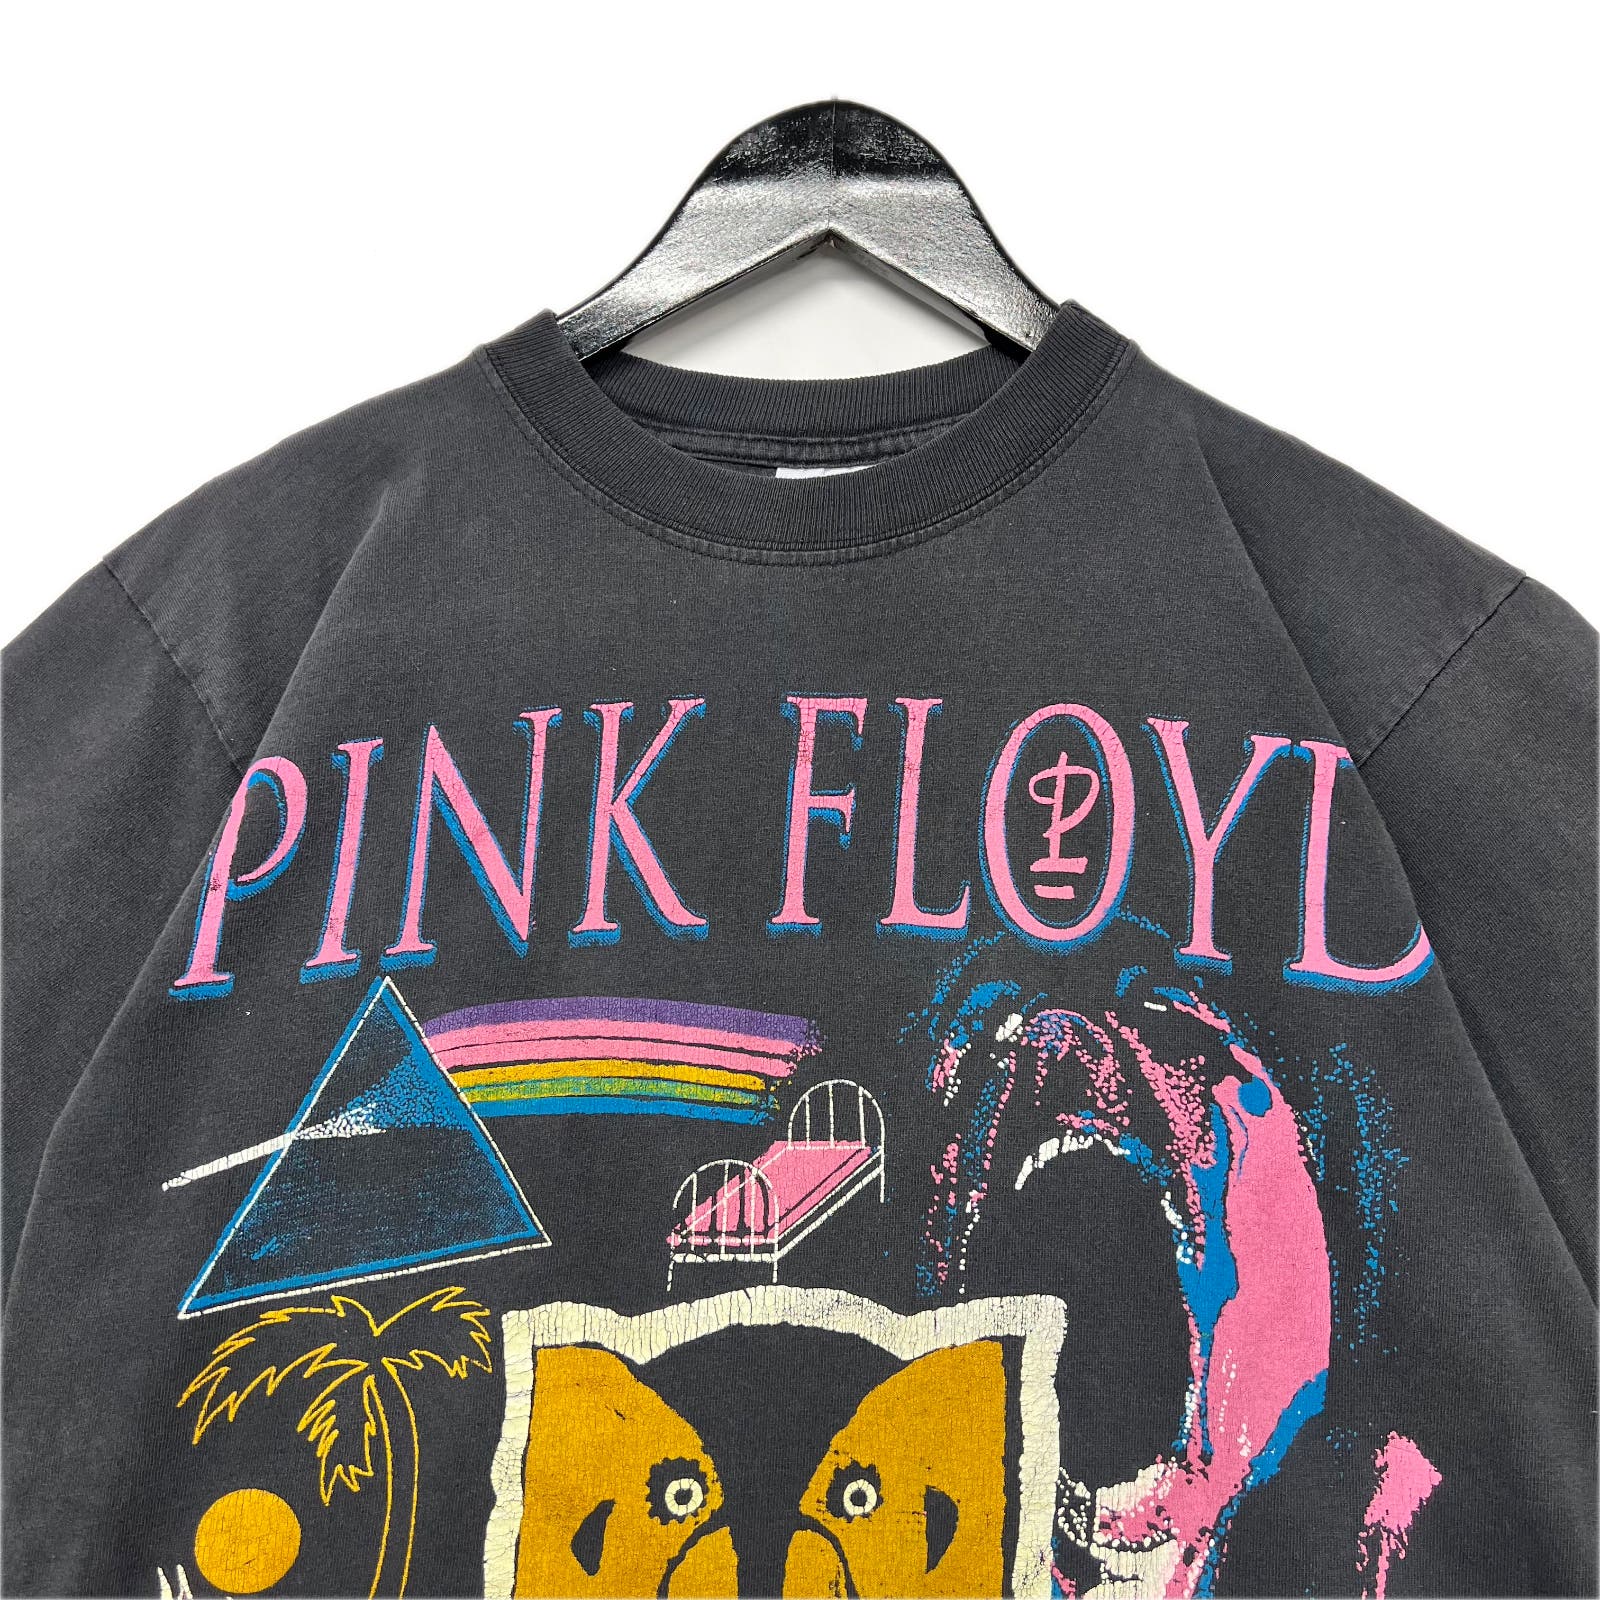 1994 Pink Floyd The Division Bell T-shirt Size L